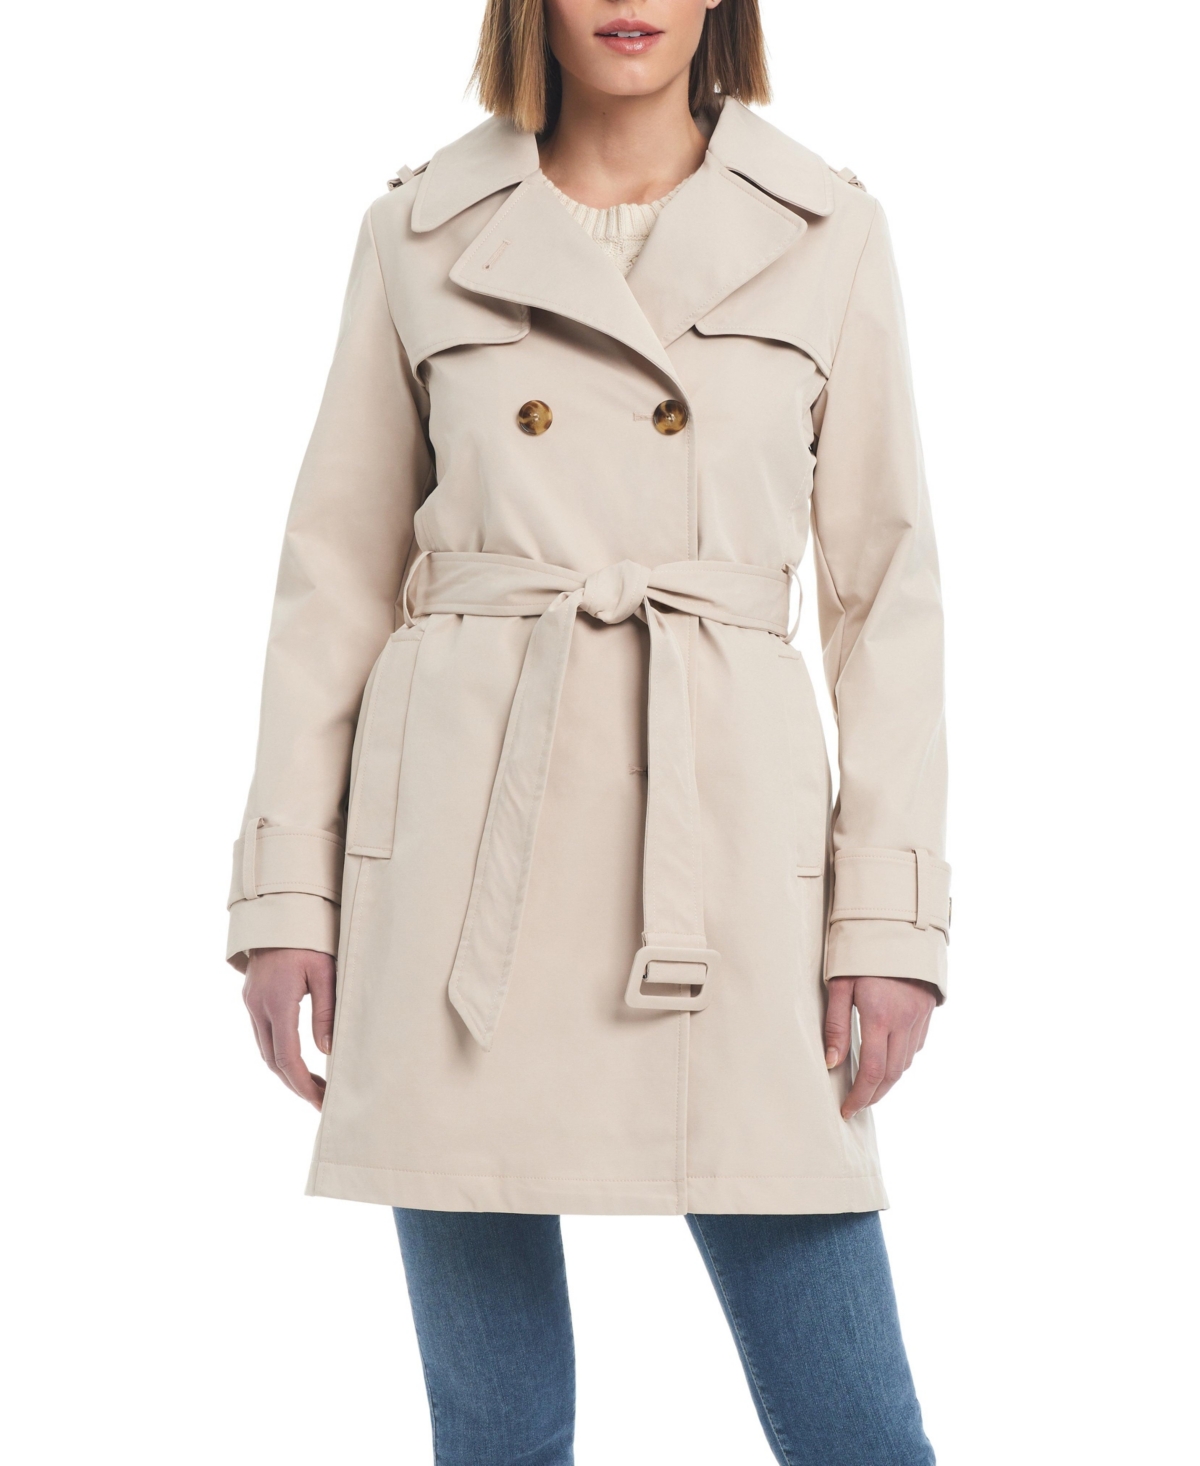 KATE SPADE WOMEN'S PLEATED BACK WATER-RESISTANT TRENCH COAT